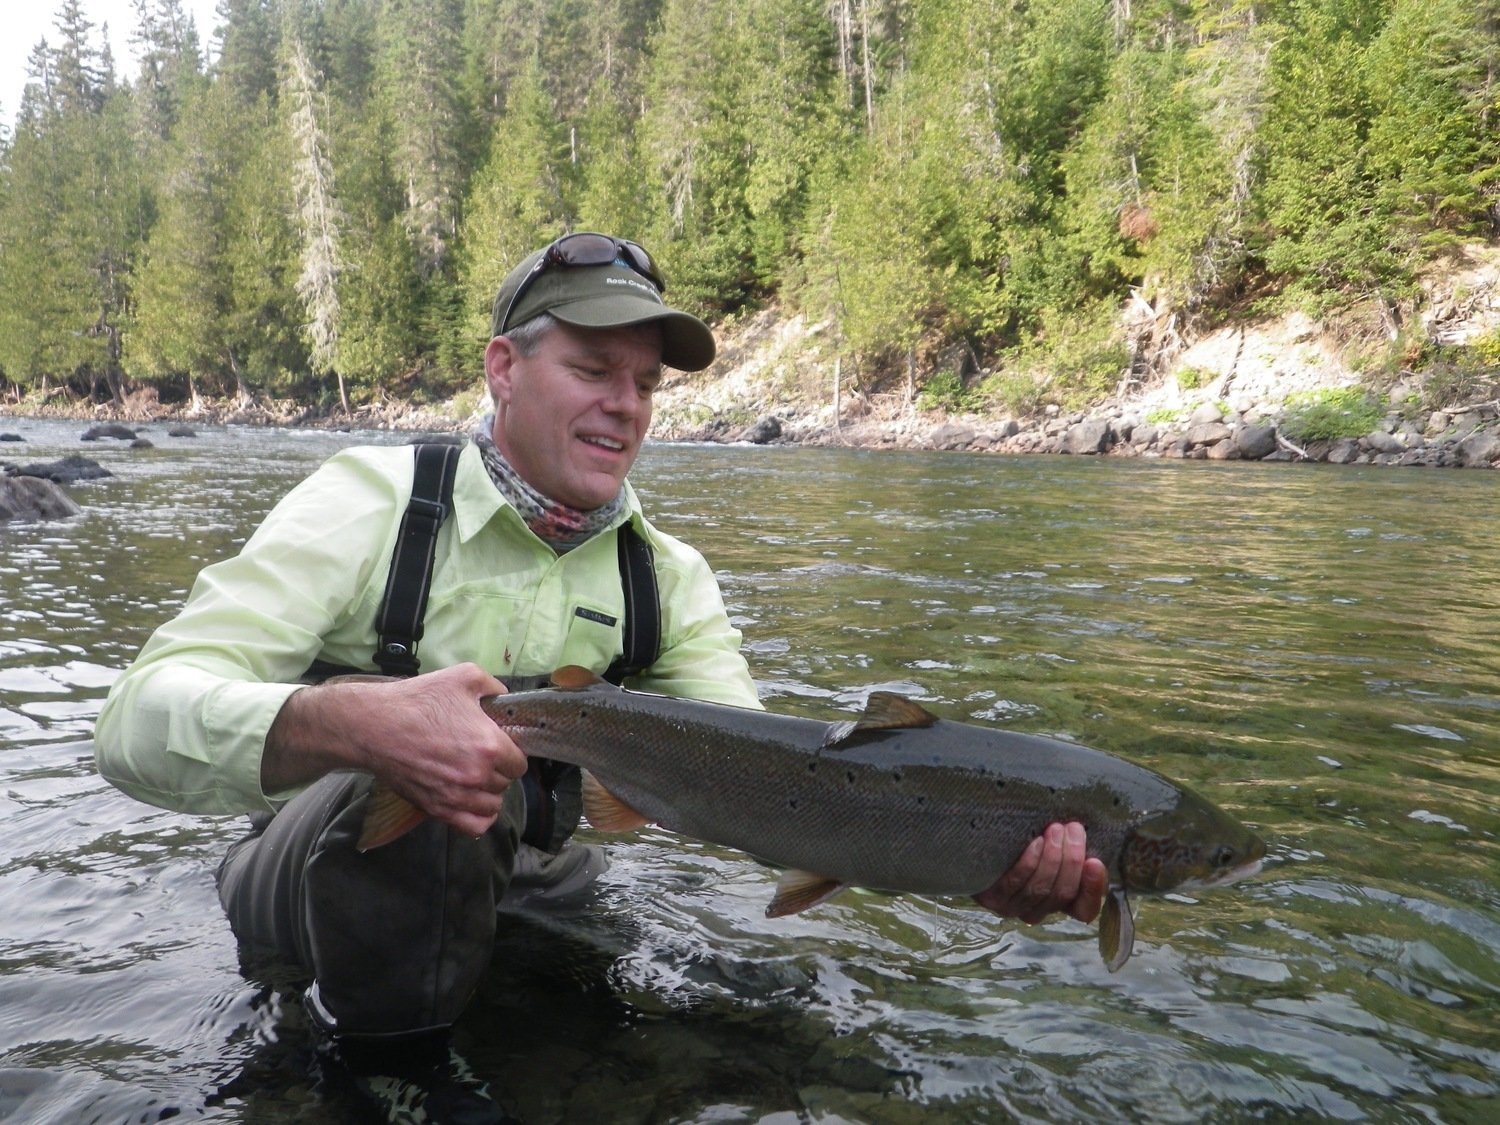 A classic pose with a fresh Atlantic Salmon caught fly fishing at our Camp Bonaventure